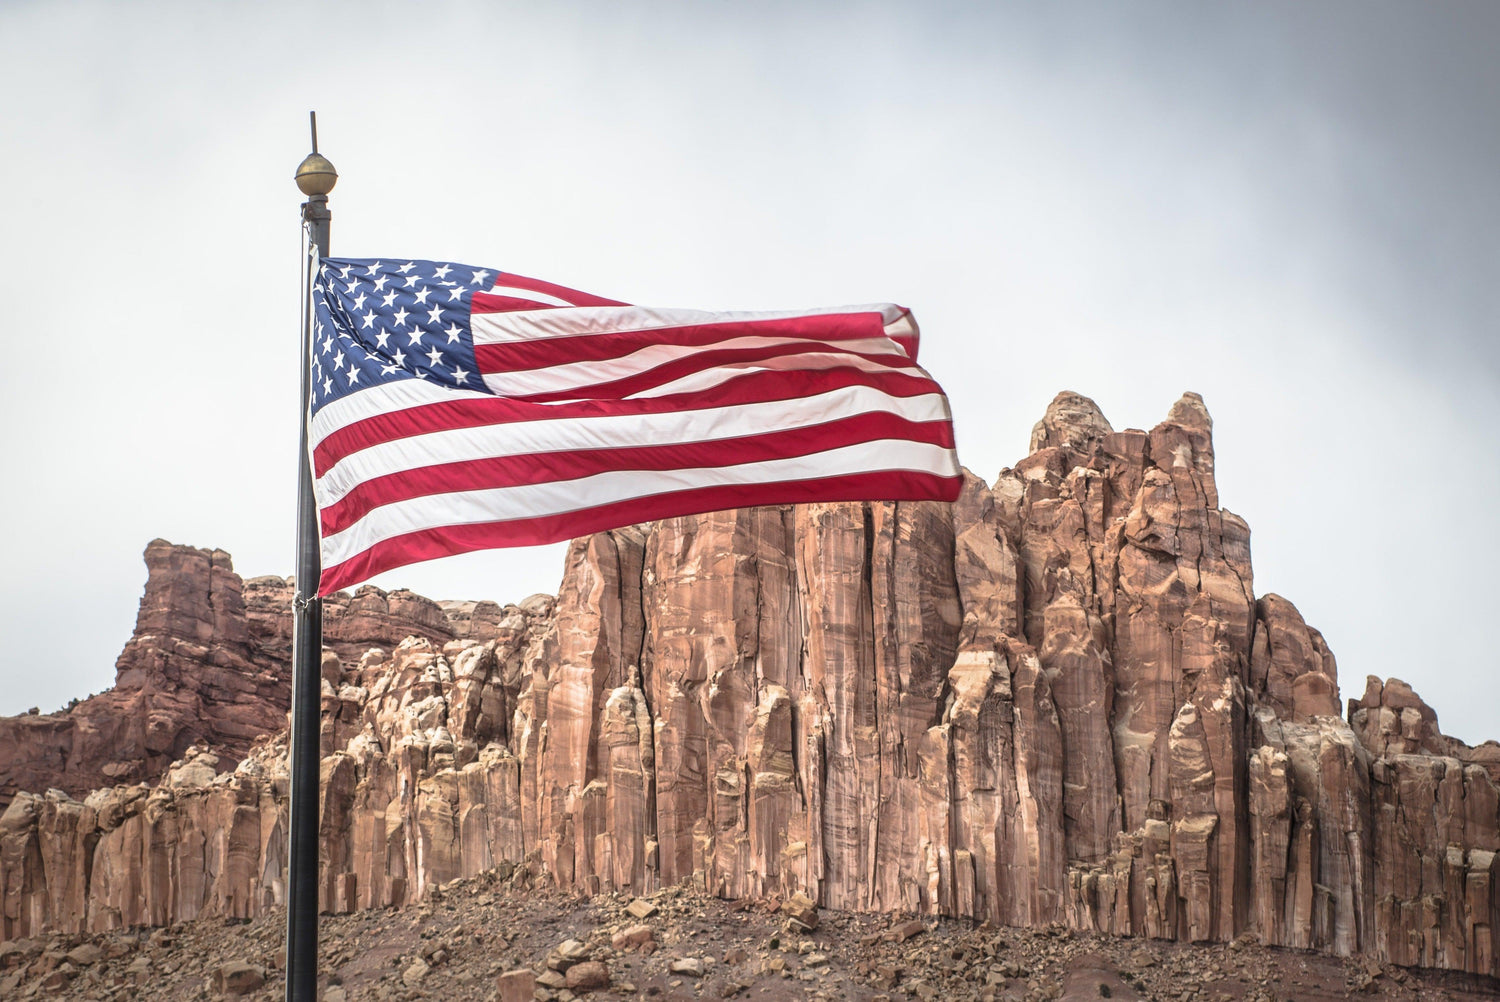 Fine Capitol Reef National Park photography print of an American flag blowing in the wind with rock formations in the background.